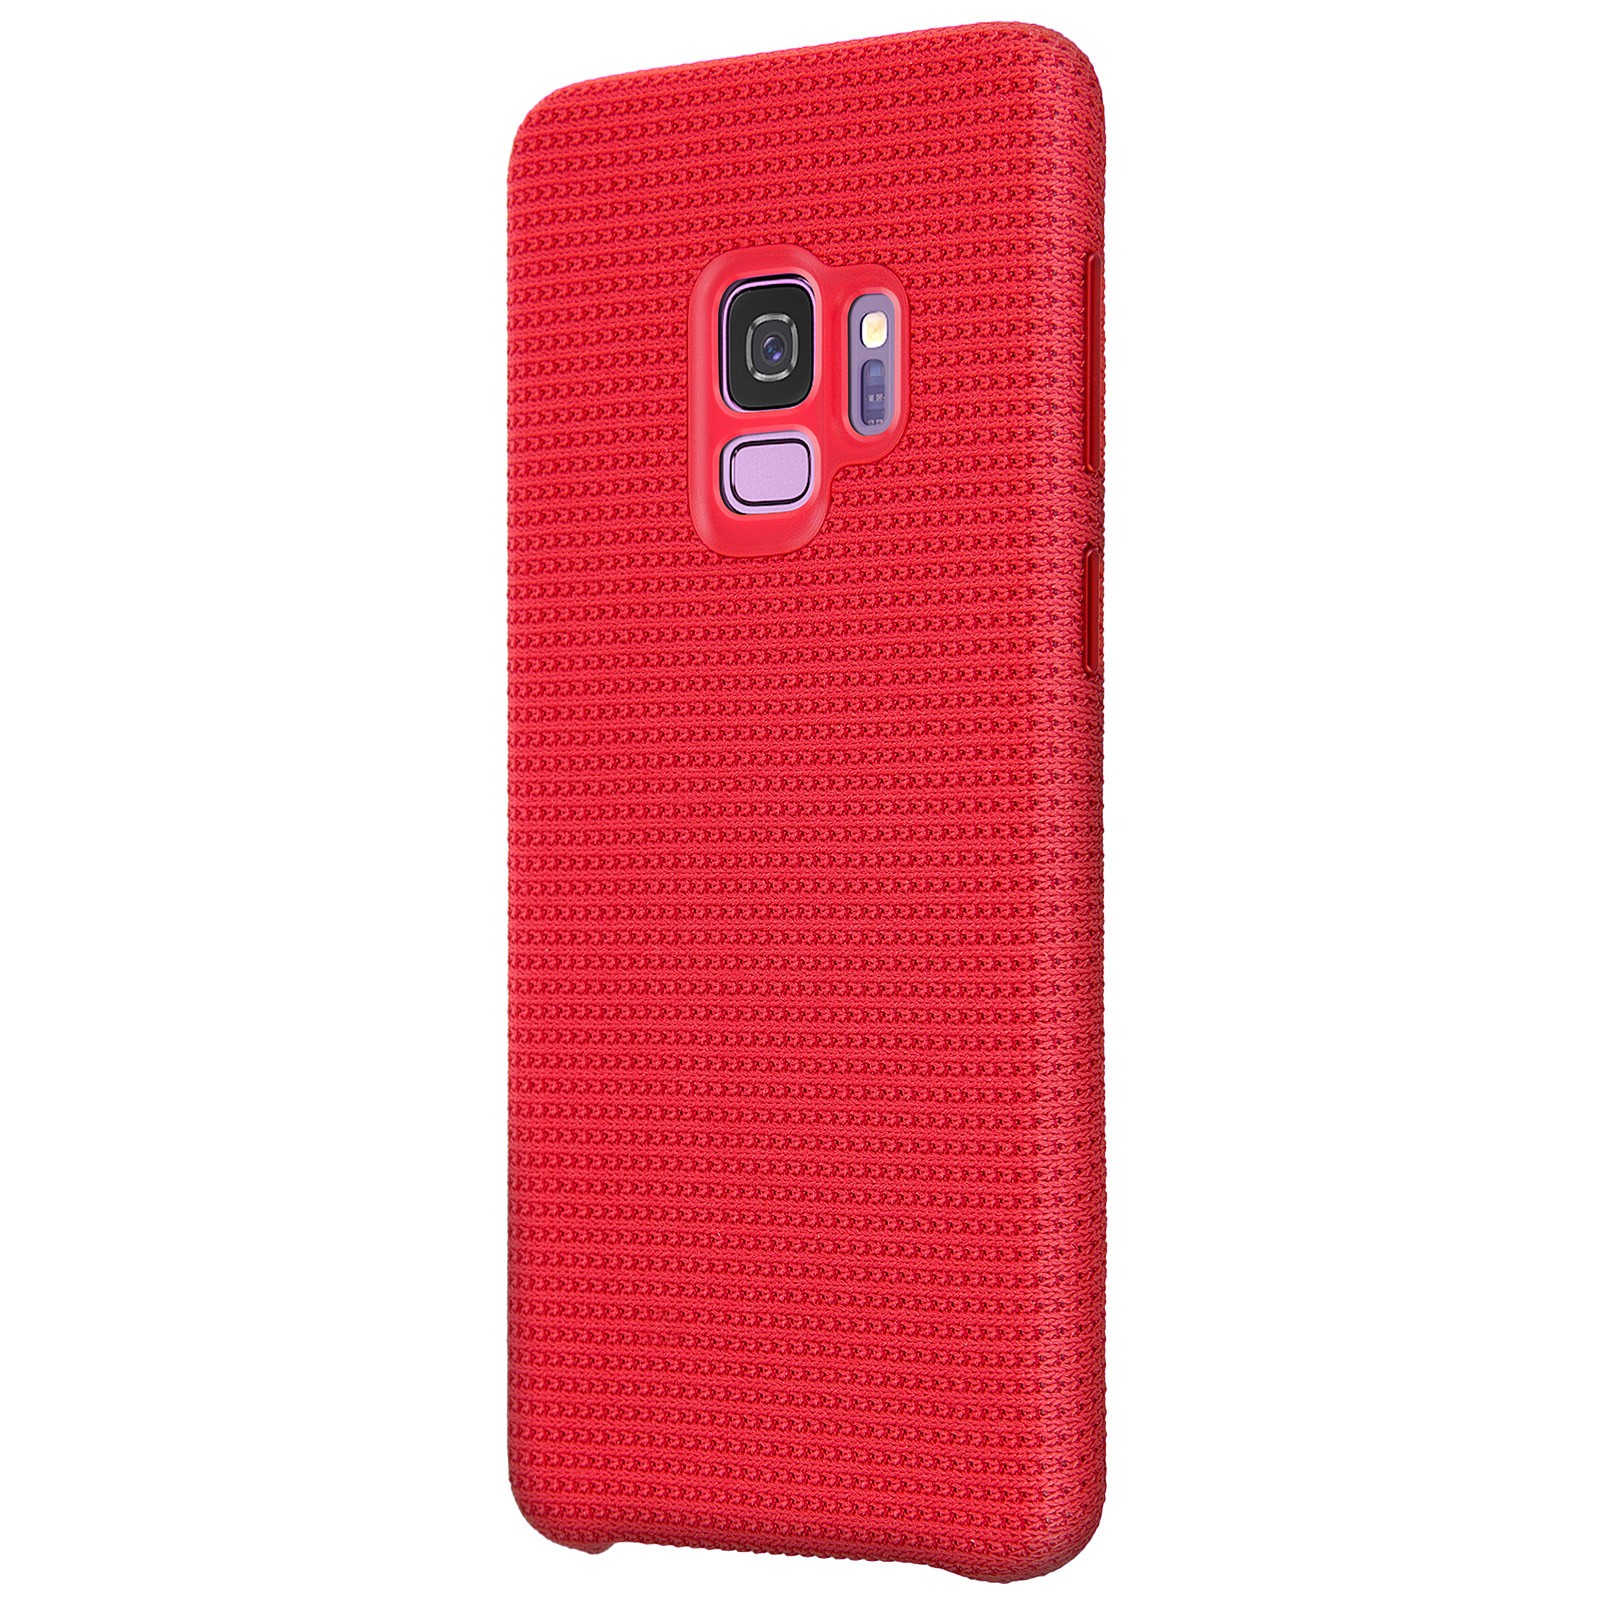 SAMSUNG Hyperknit Cover Keine Angabe S9 - Bookcover, for Samsung, Galaxy Galaxy Case (Red), S9